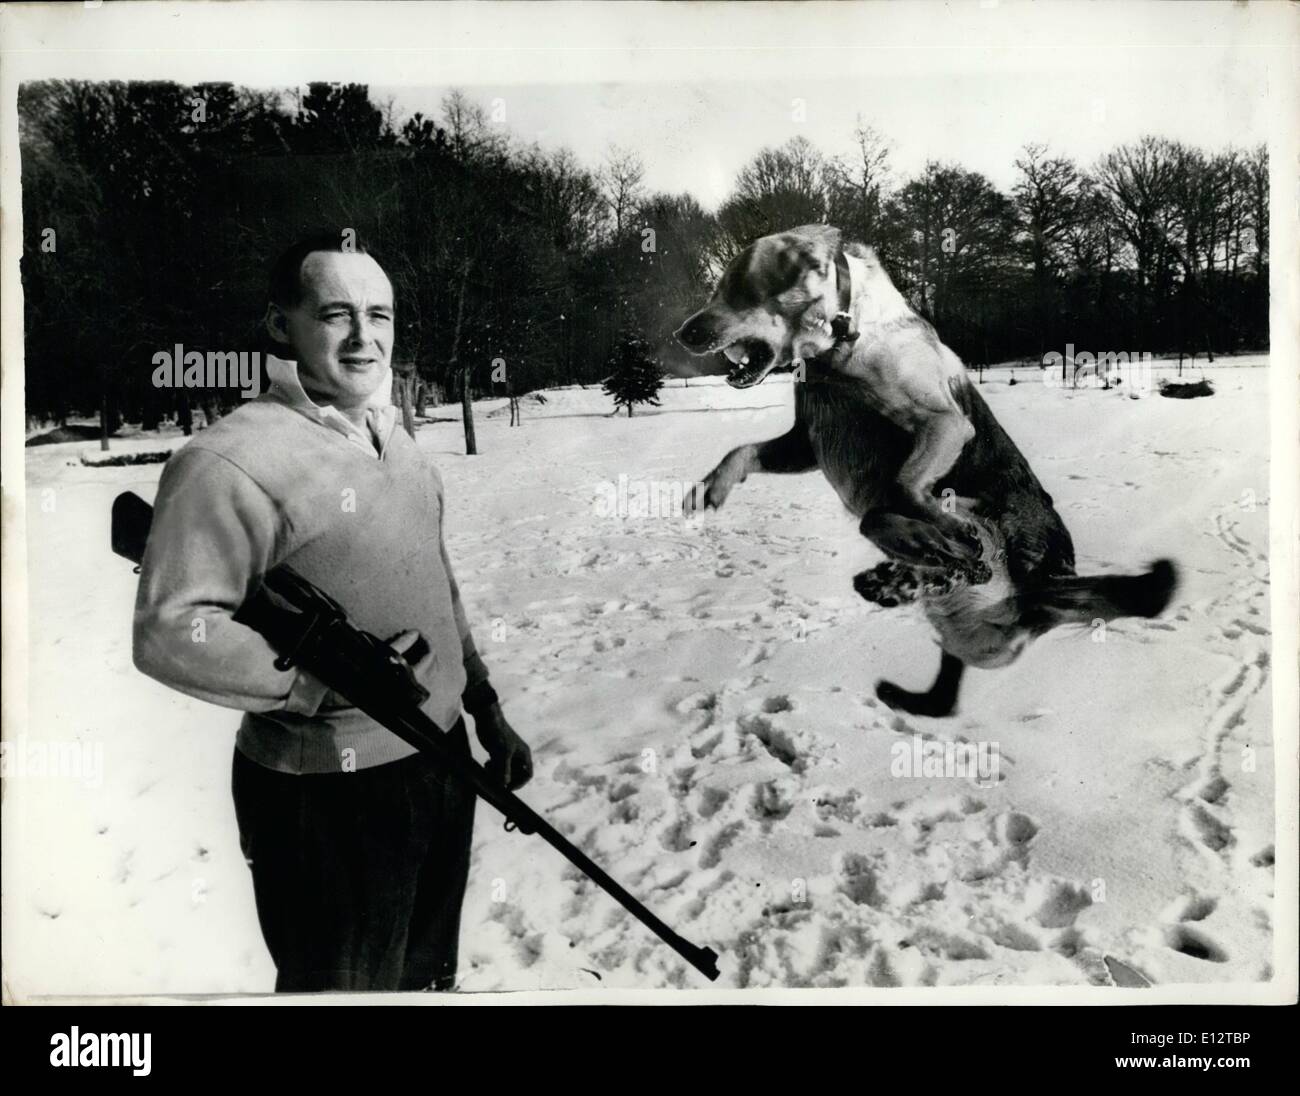 Feb. 24, 2012 - Donald Campbell Relaxes In The Snow - Before leaving For Speed Attempts In Australia.. Speed King Donald Campbell was to be seen with his gun ad his dog - in the grounds of his home in Horsehills, Surrey - relaxing with a spot of shooting at targets before departure for Australia. he hopes to set up a new world land speed record in his car ''Bluebird'' on the Lake Eyre Salt flats in South Australia. Present record of 394.2 m.p.h. was set up by the late John Cobb in 1947 Stock Photo